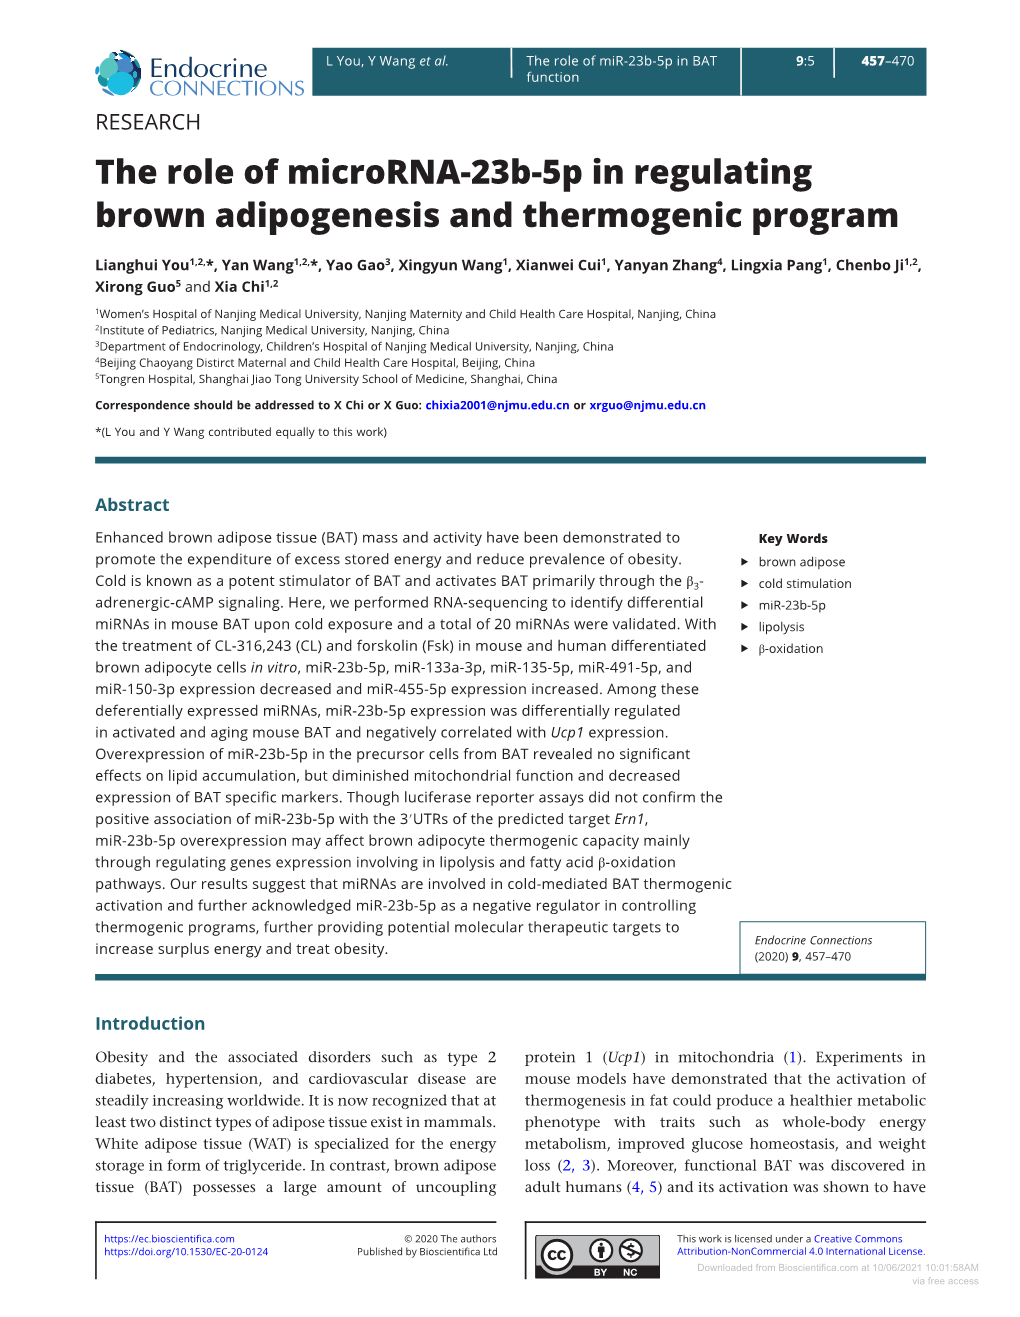 The Role of Microrna-23B-5P in Regulating Brown Adipogenesis and Thermogenic Program